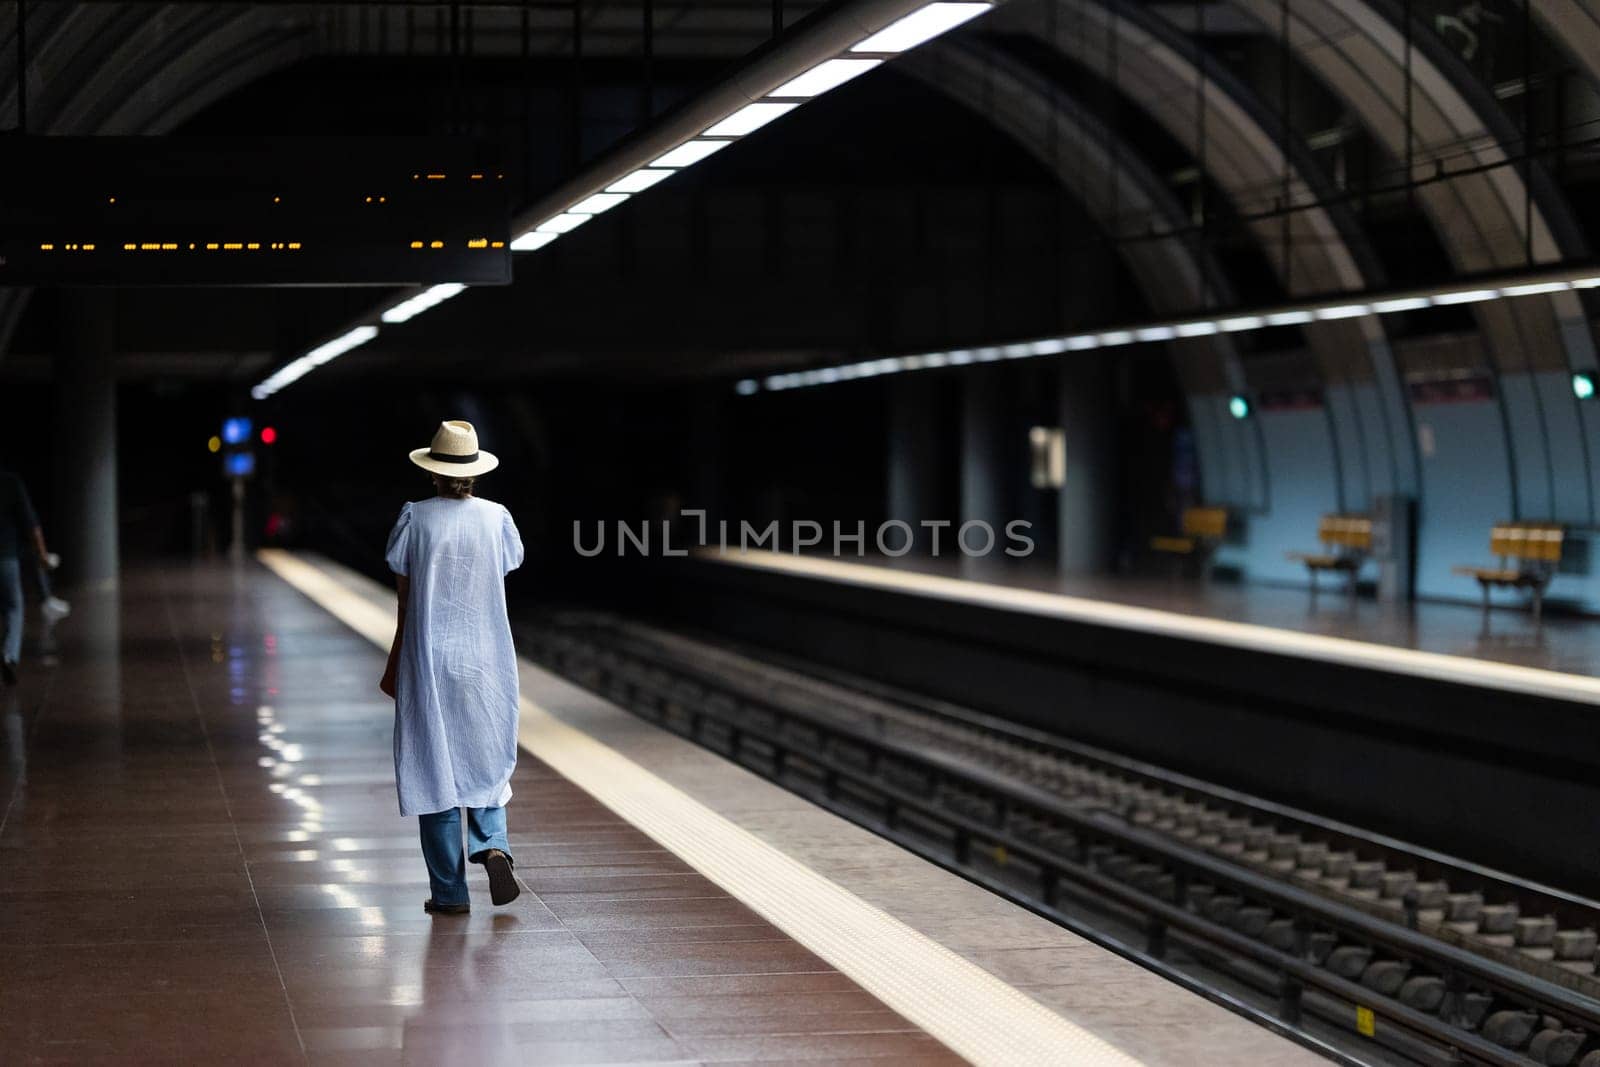 A solitary woman patiently waiting on a well-lit subway platform for the arriving train.